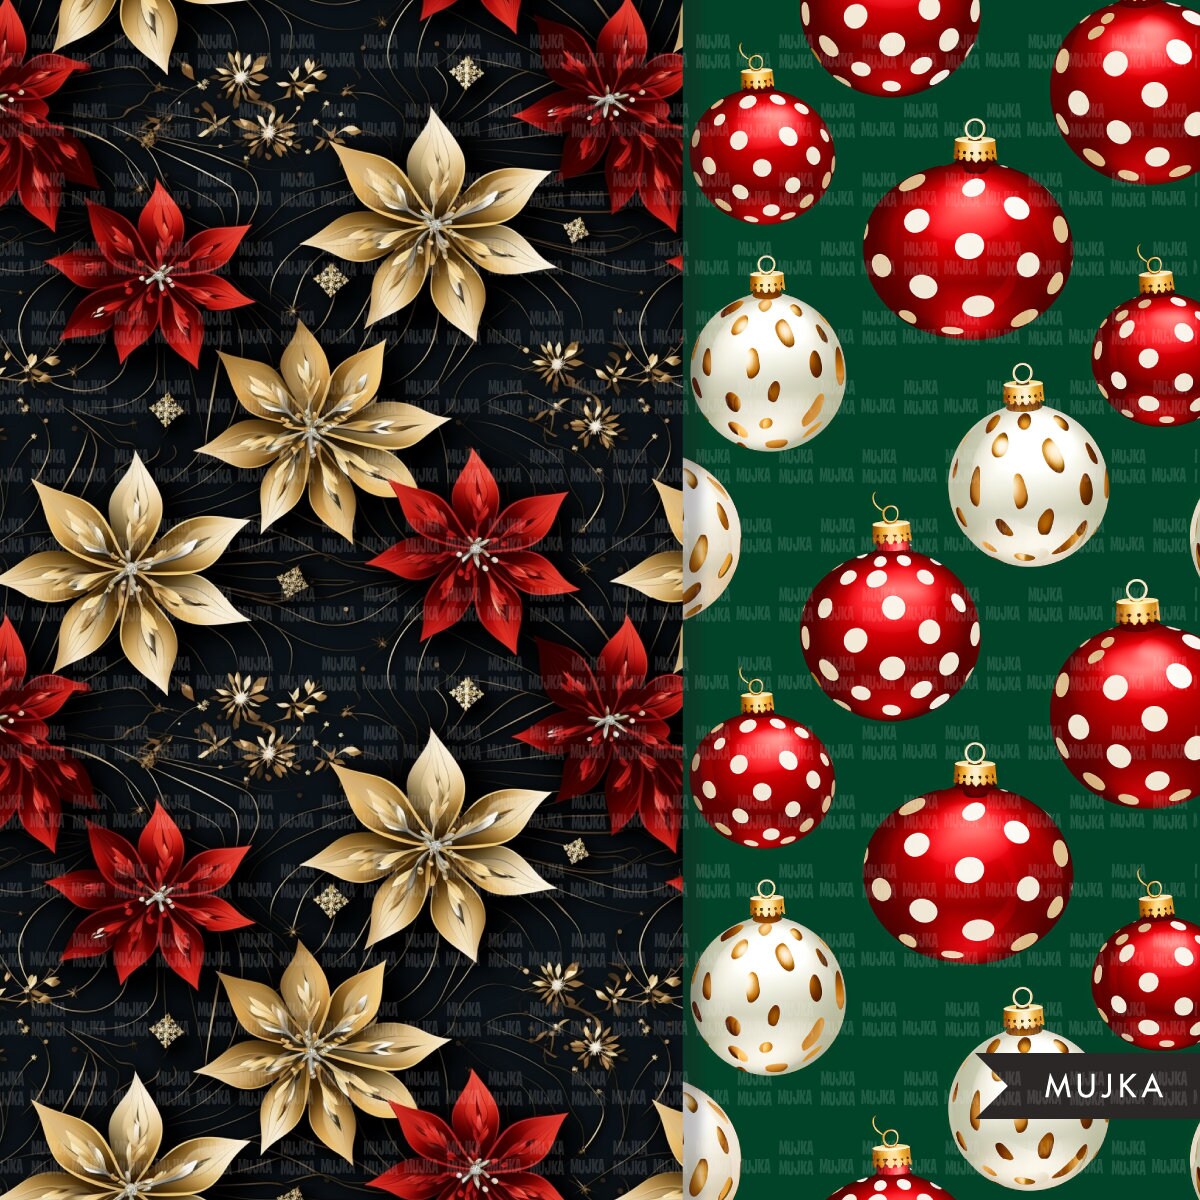 Christmas digital papers, Glam Black and gold Christmas papers, Noel backgrounds, seamless patterns, glitter papers, fancy wrapping papers